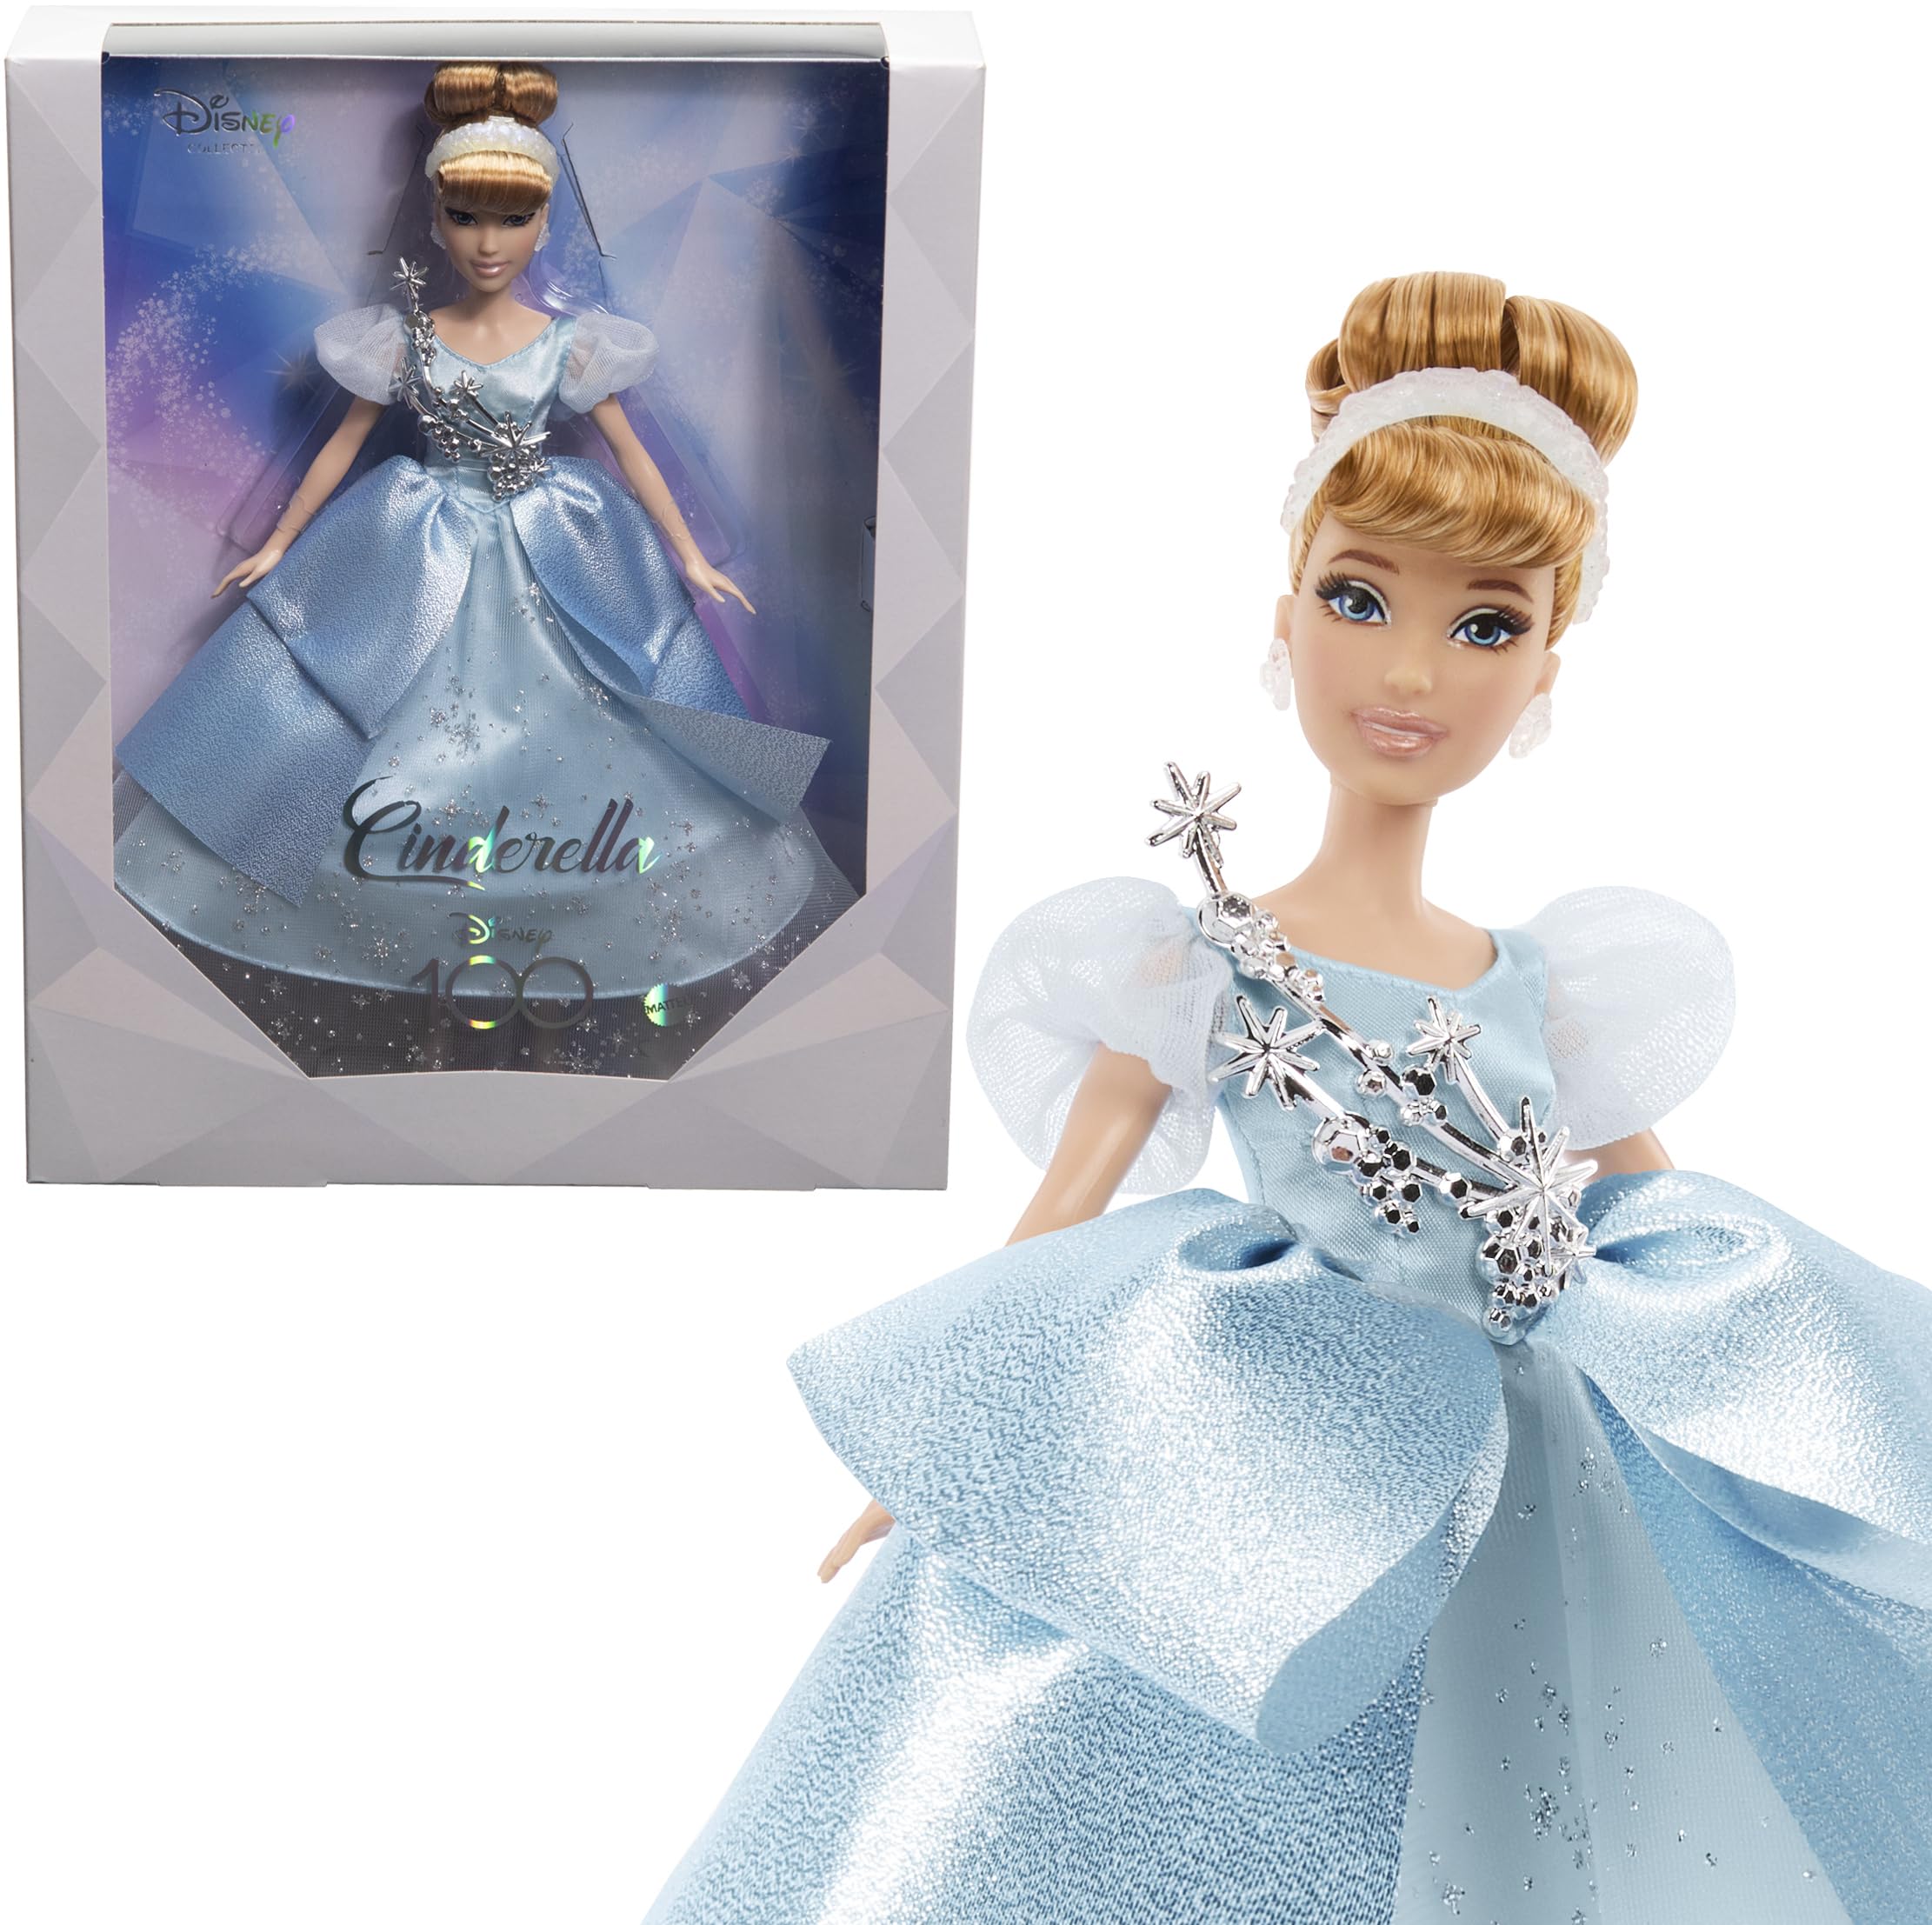 Disney Toys, Collector Cinderella Doll to Celebrate Disney 100 Years of Wonder, Inspired by Disney Movie, Gifts for Kids and Collectors